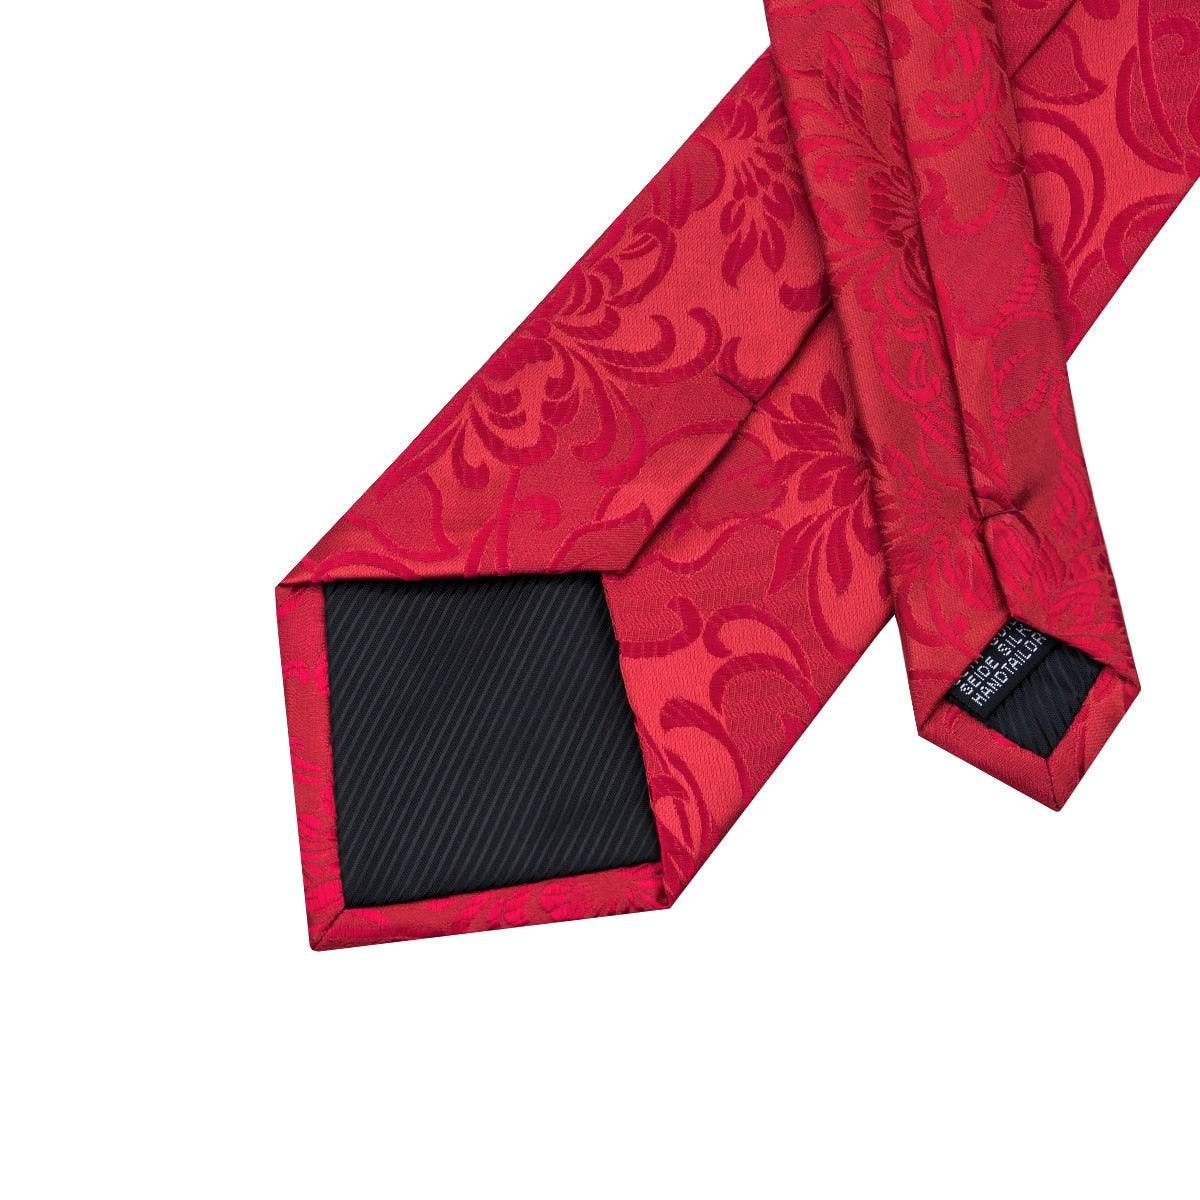 Floral Classic Luxury Men's Tie Set - Silk Large Fashion Gift (MA2)